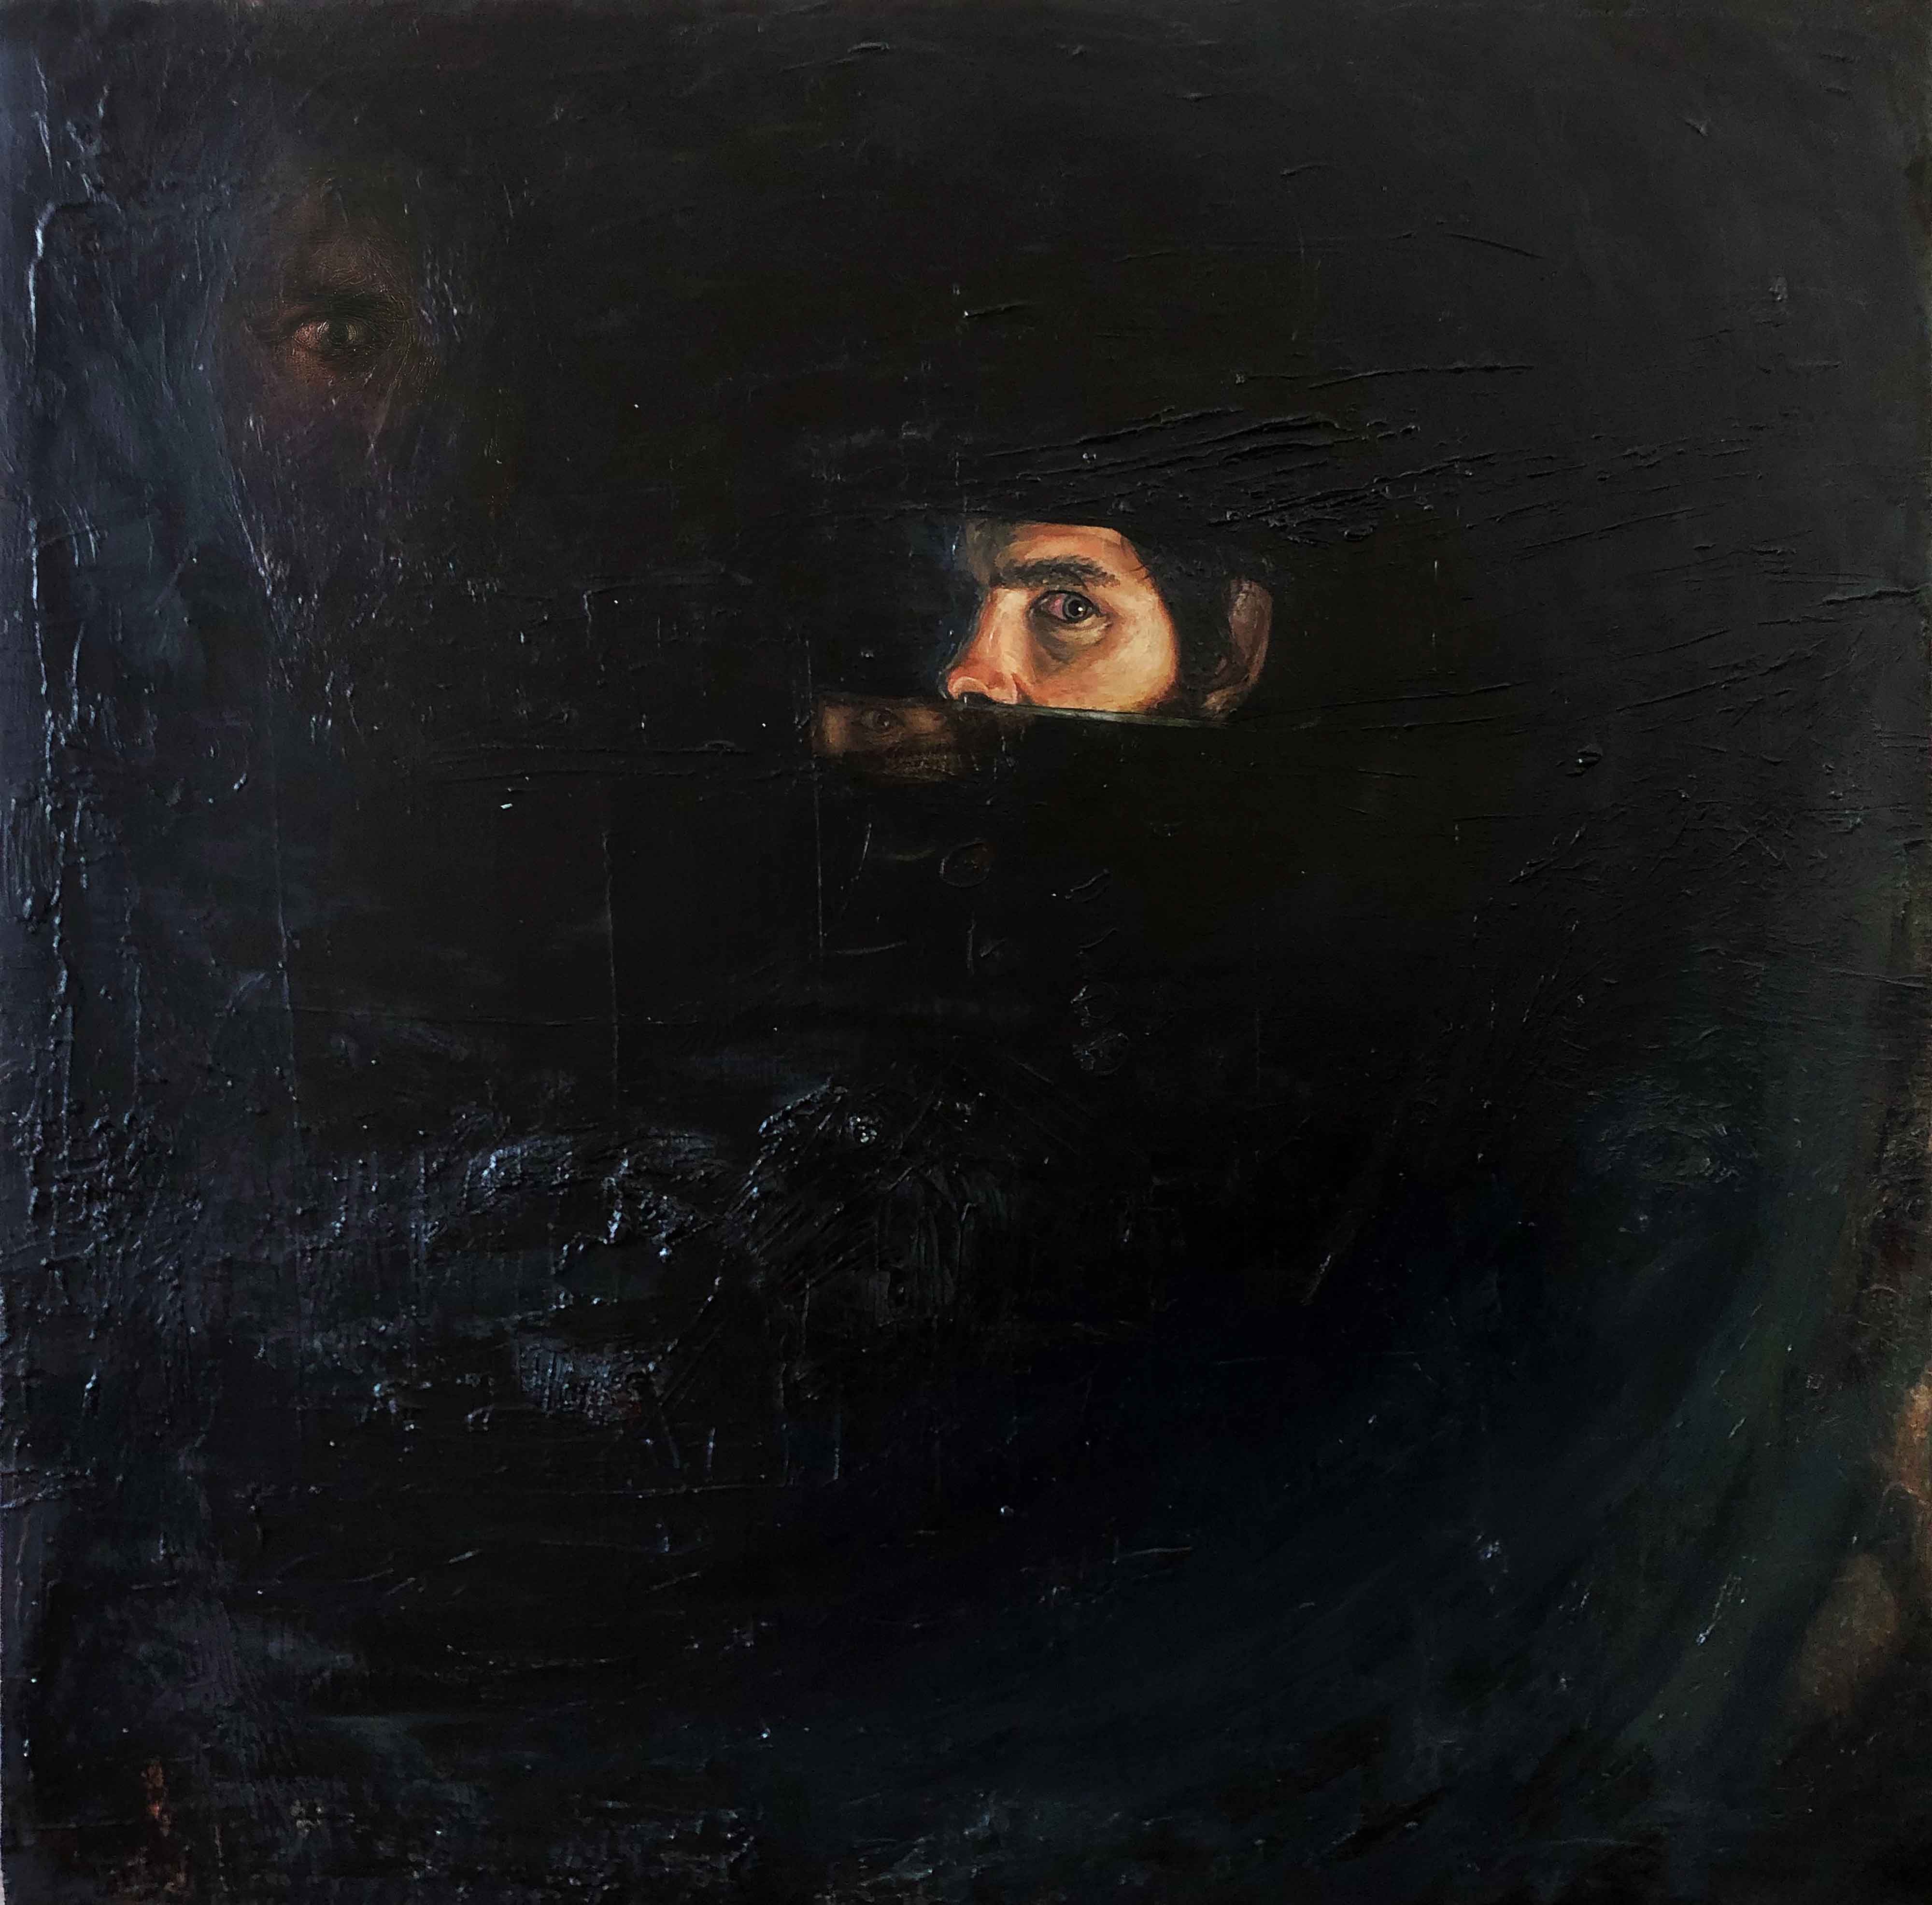 Timothy Robert Smith, “Blind Spot,” 2019, oil on wood, 24 x 24 in.